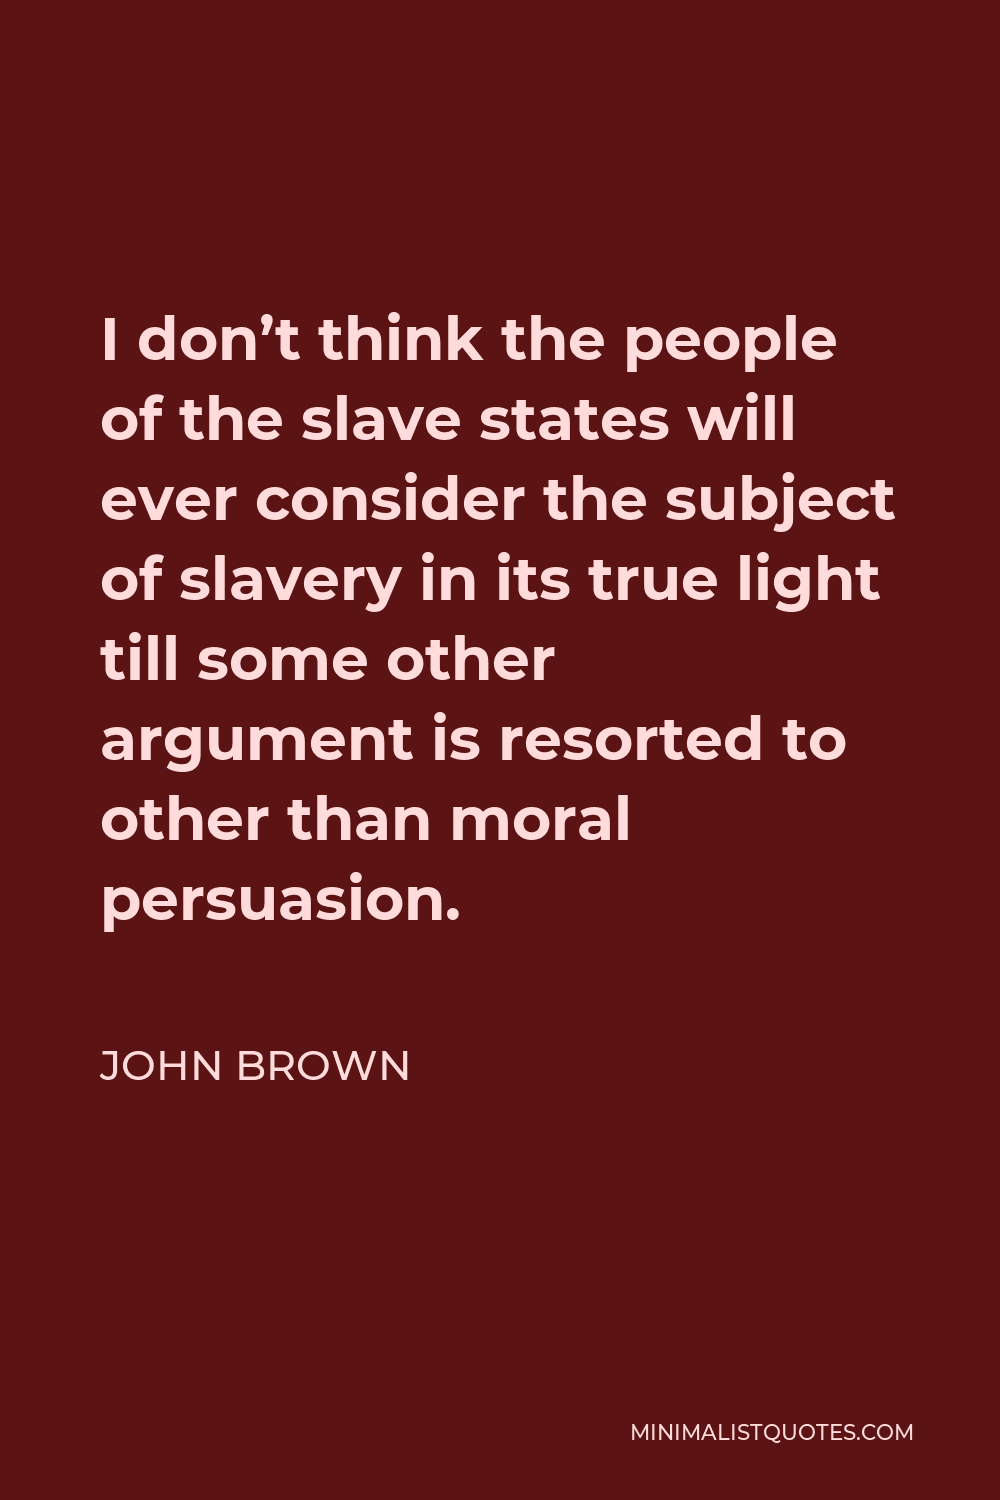 John Brown Quote - I don’t think the people of the slave states will ever consider the subject of slavery in its true light till some other argument is resorted to other than moral persuasion.